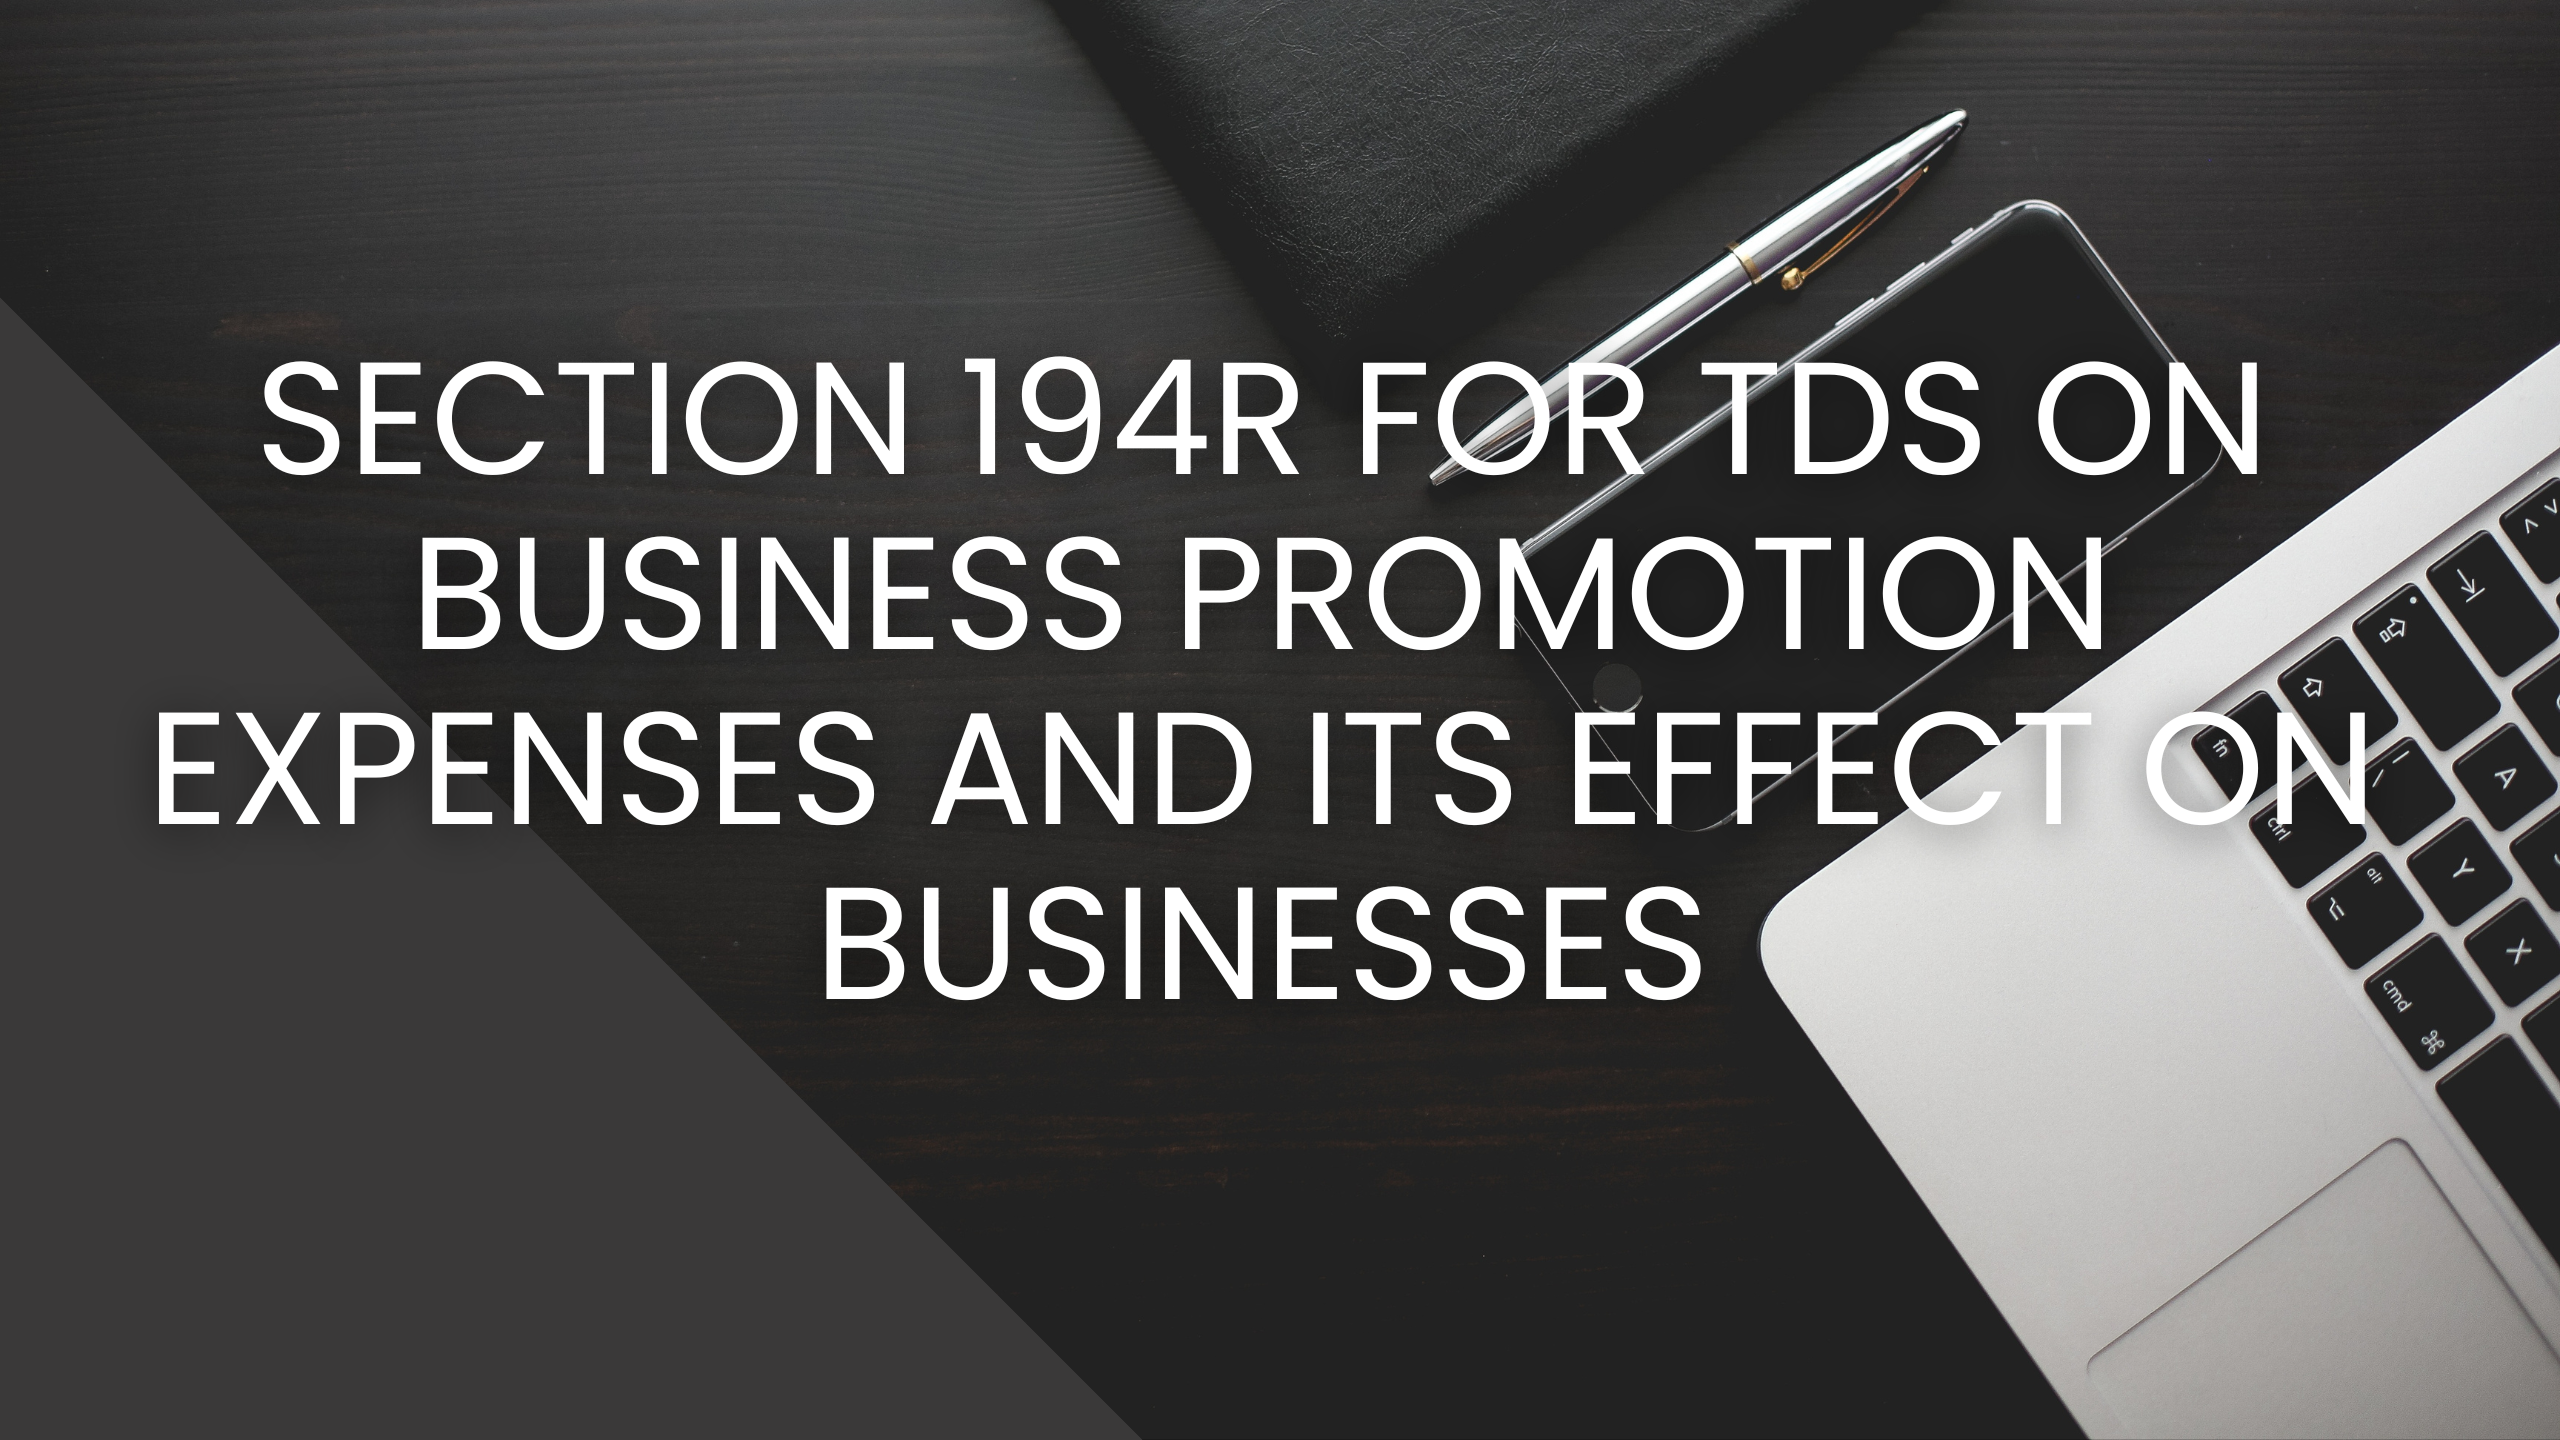 Section 194R for TDS on Business Promotion Expenses